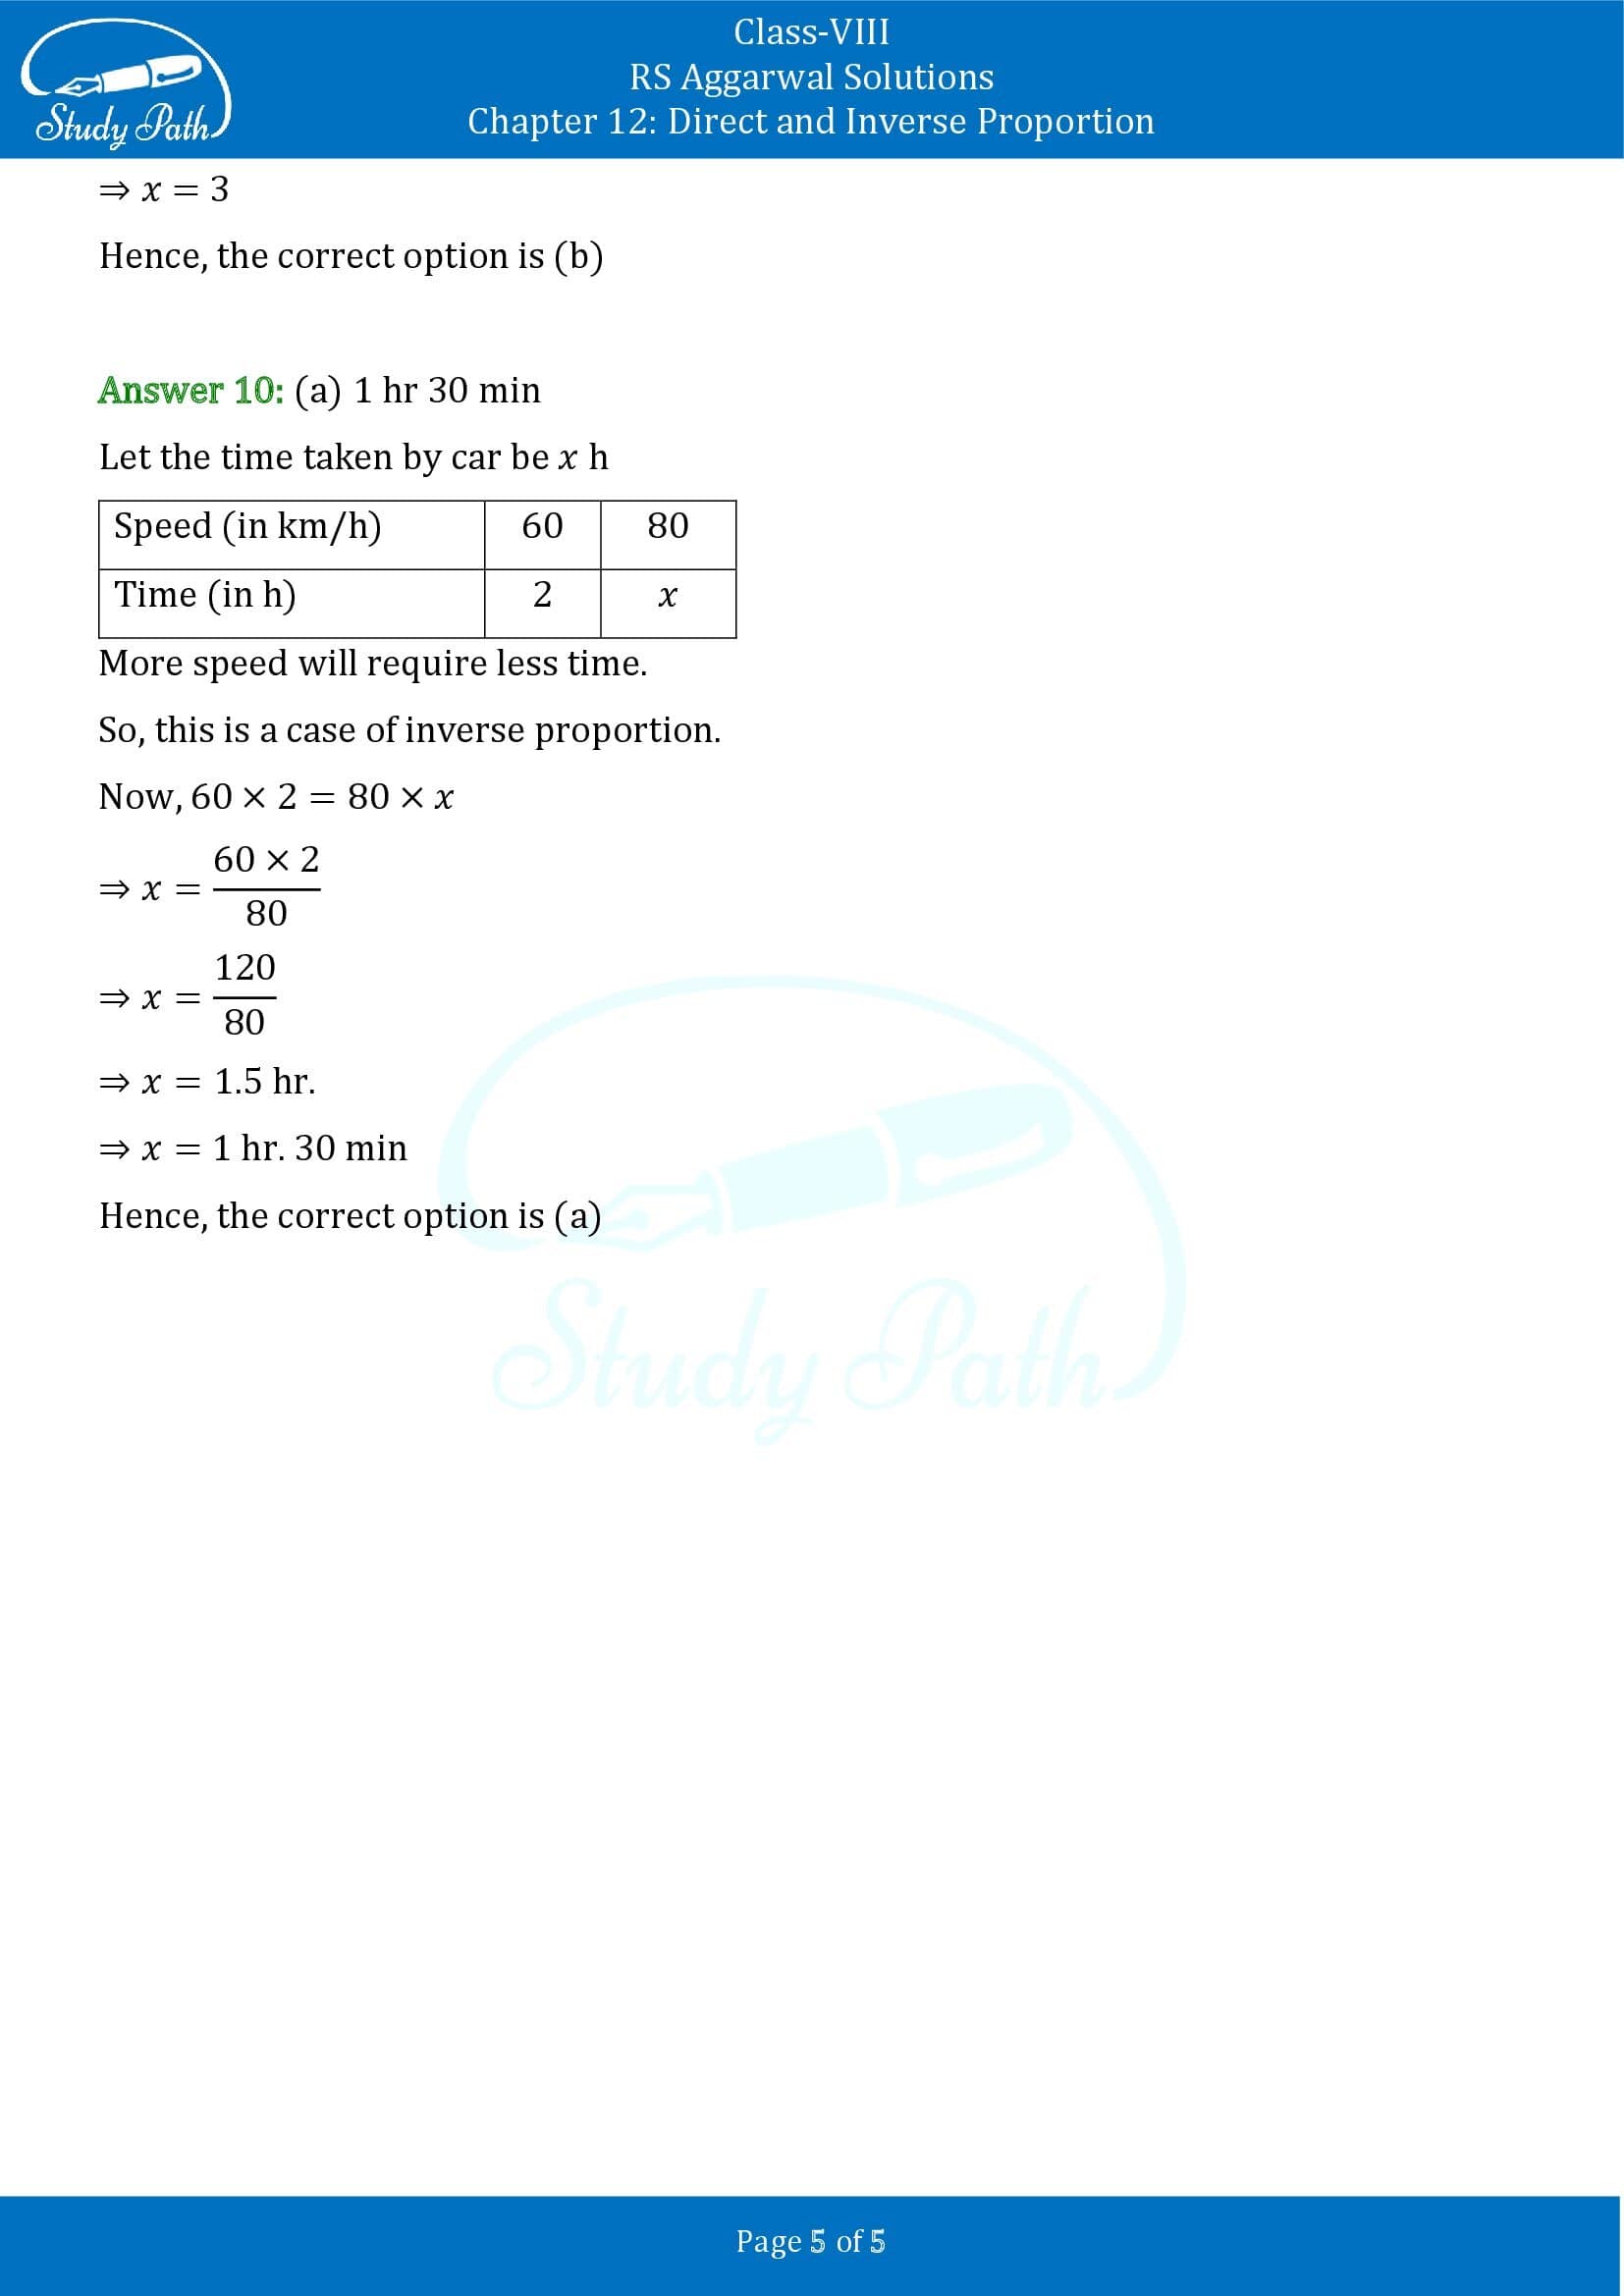 RS Aggarwal Solutions Class 8 Chapter 12 Direct and Inverse Proportion Exercise 12C MCQs 00005